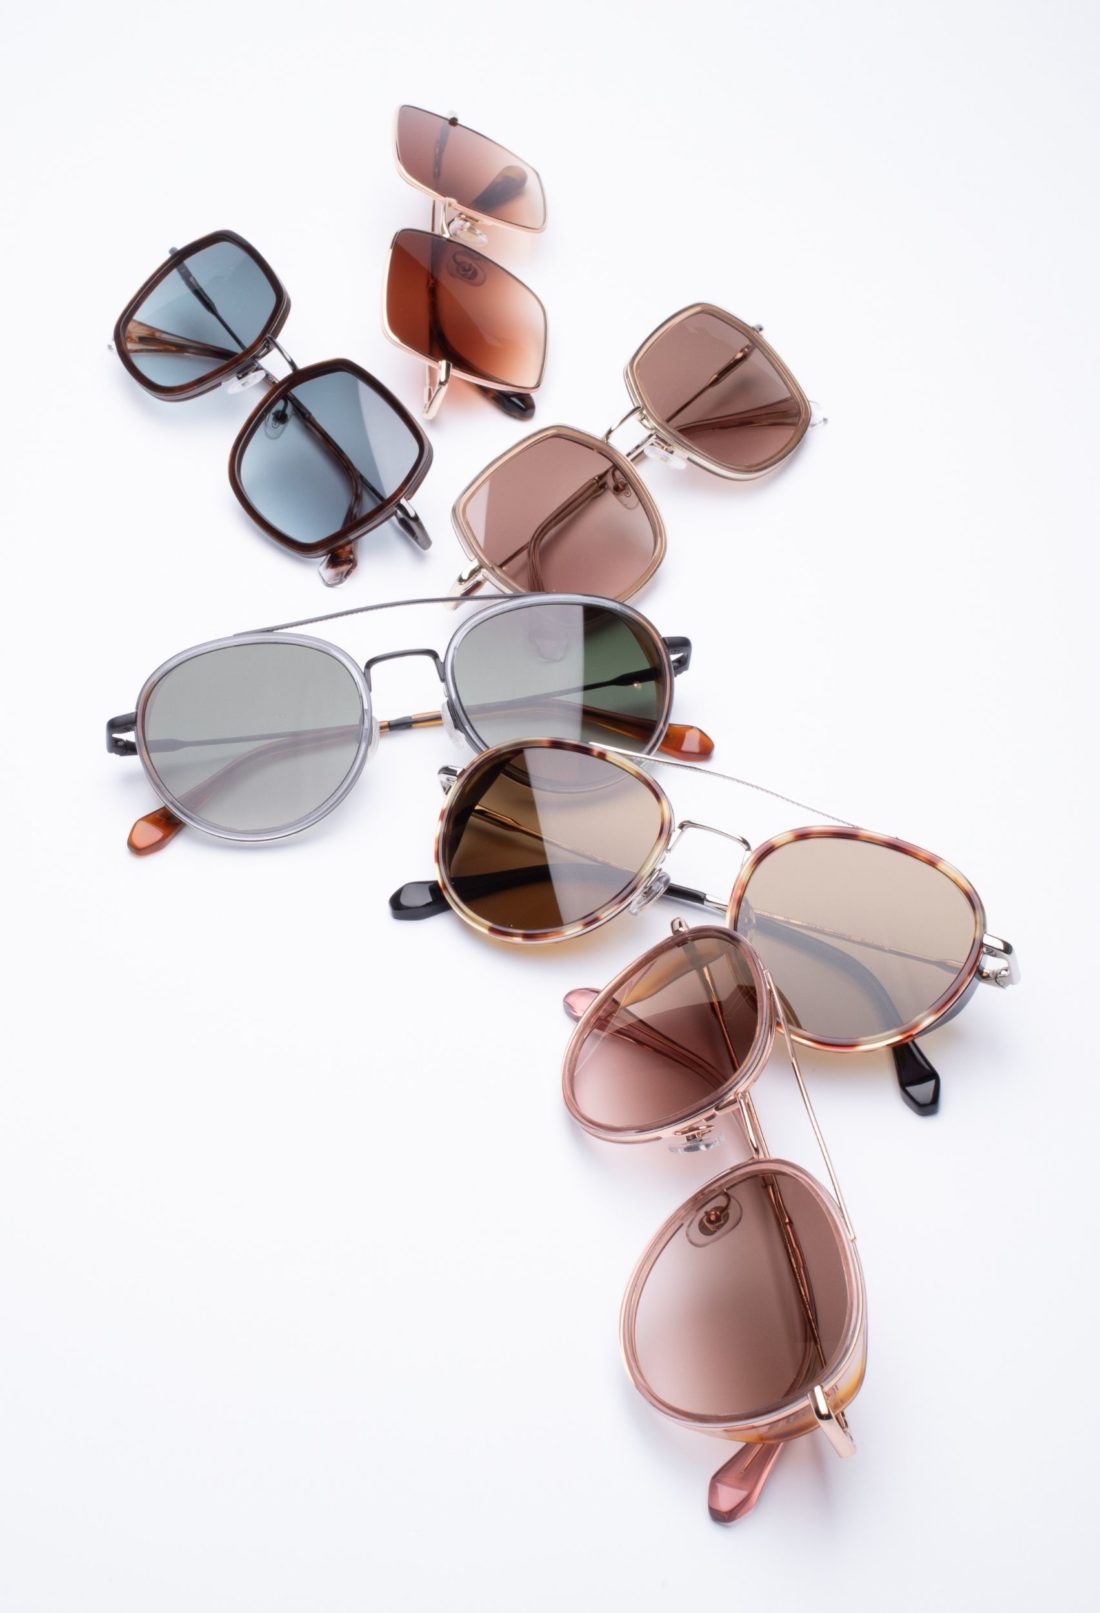 Tips for Picking a Good Pair of Sunglasses